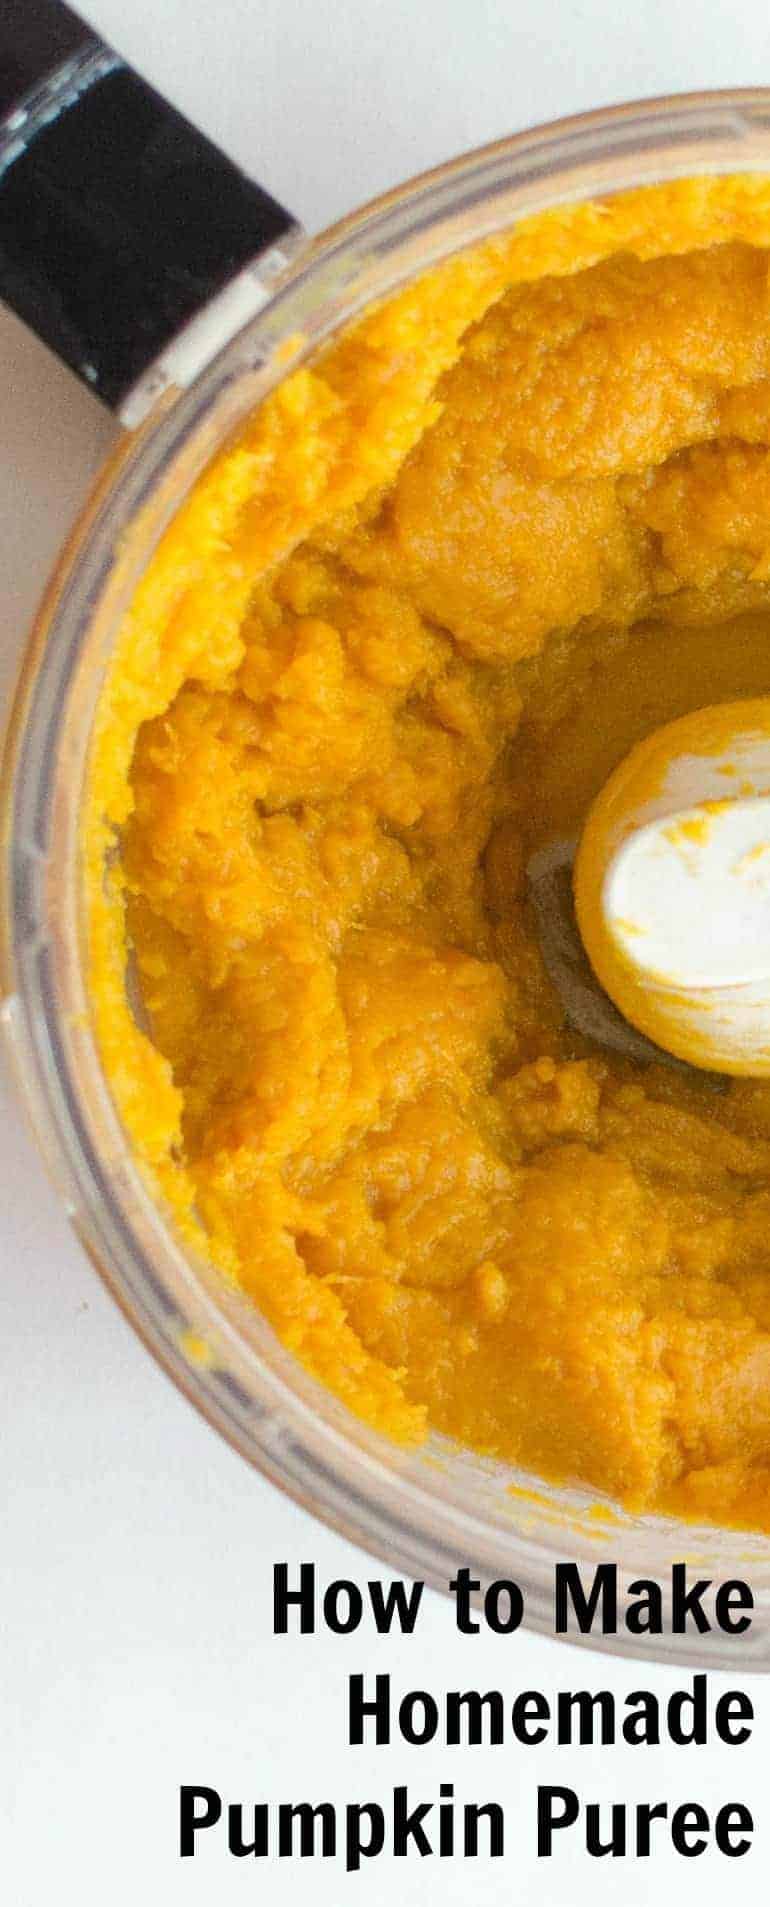 Homemade pumpkin puree is as simple as roasting, scooping, and blending a fresh pumpkin into a simple puree. You are going to love it's bright color, smooth texture, and simple preparation.